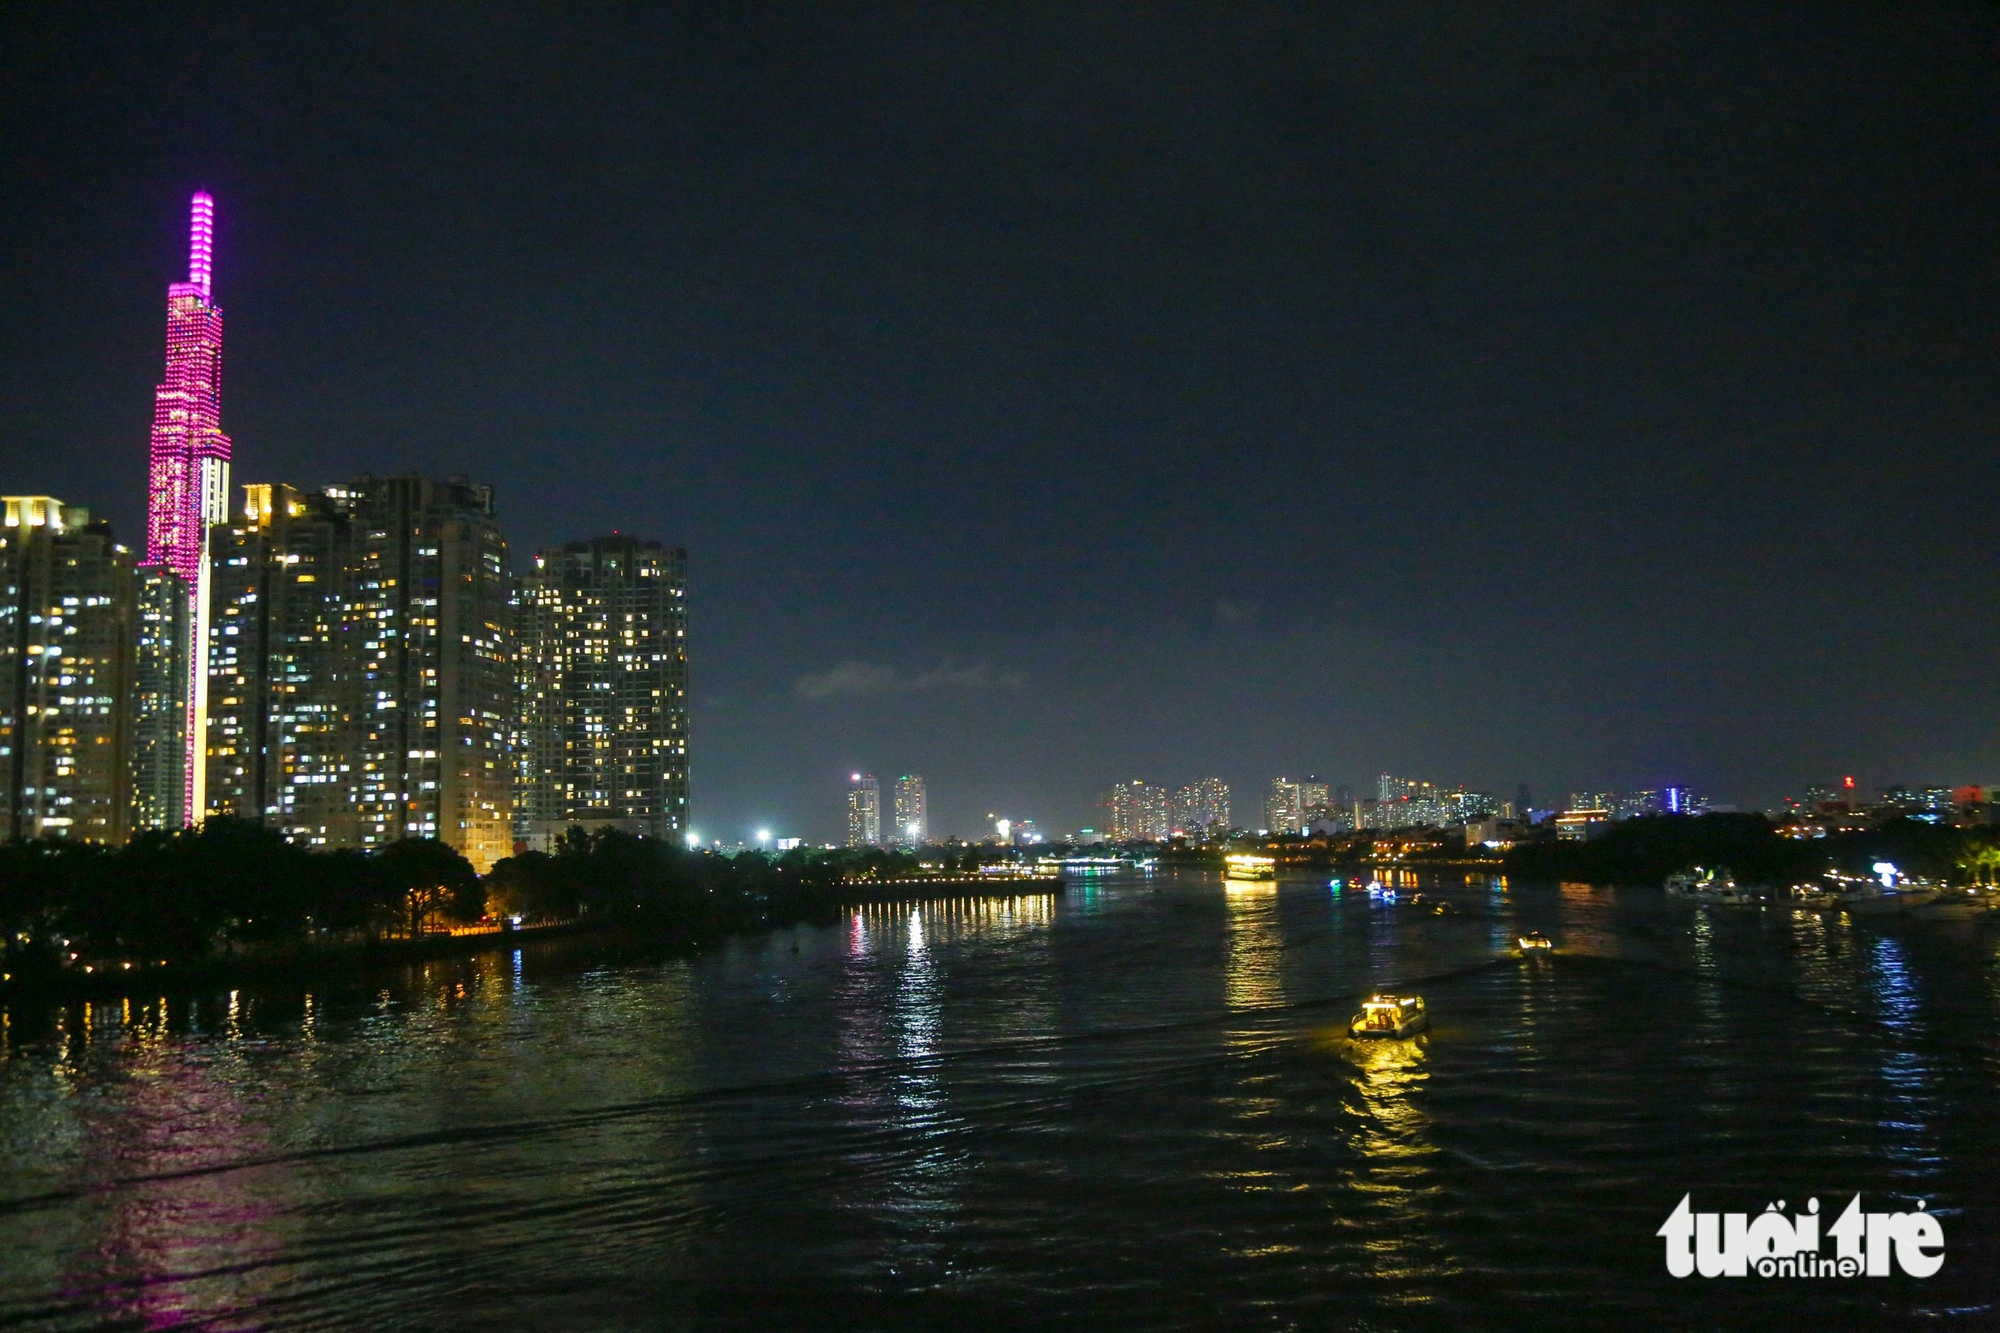 The boat parade is seen at the Vinhomes Central Park Tan Cang area. Photo: Phuong Quyen / Tuoi Tre